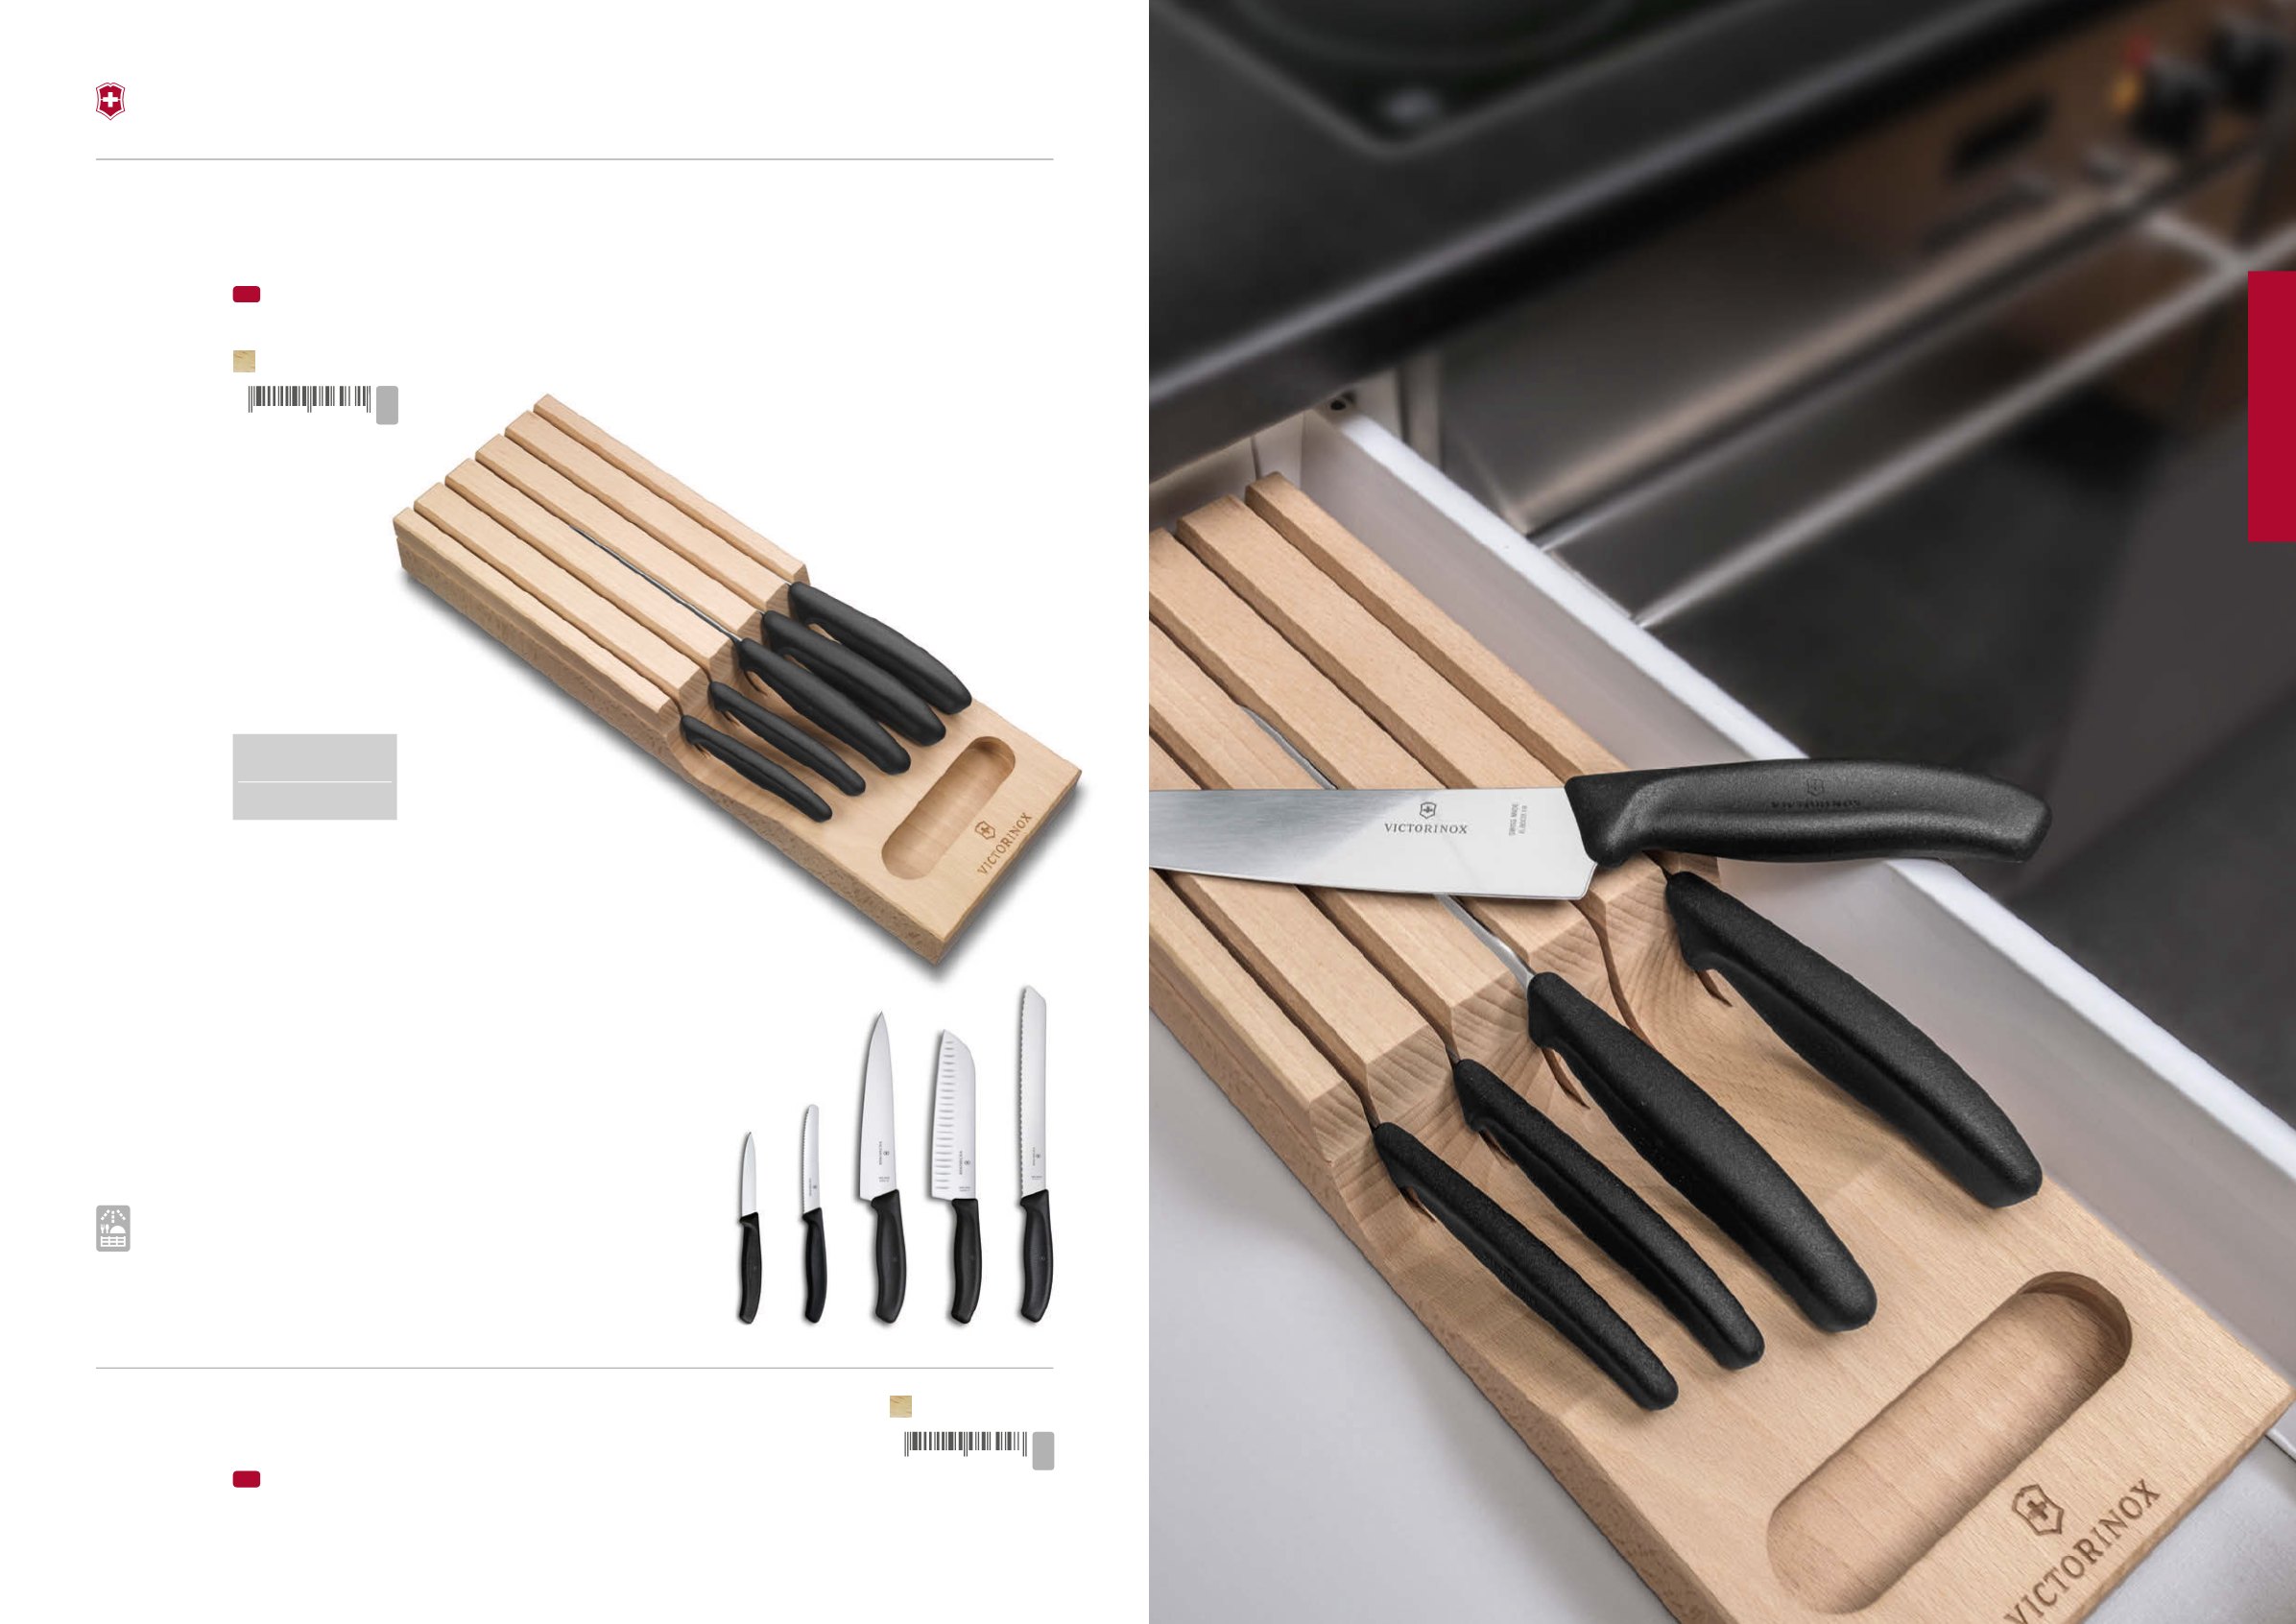 Victorinox SwissClassic 6.7143.5, 6-piece knife set including in drawer  knife holder